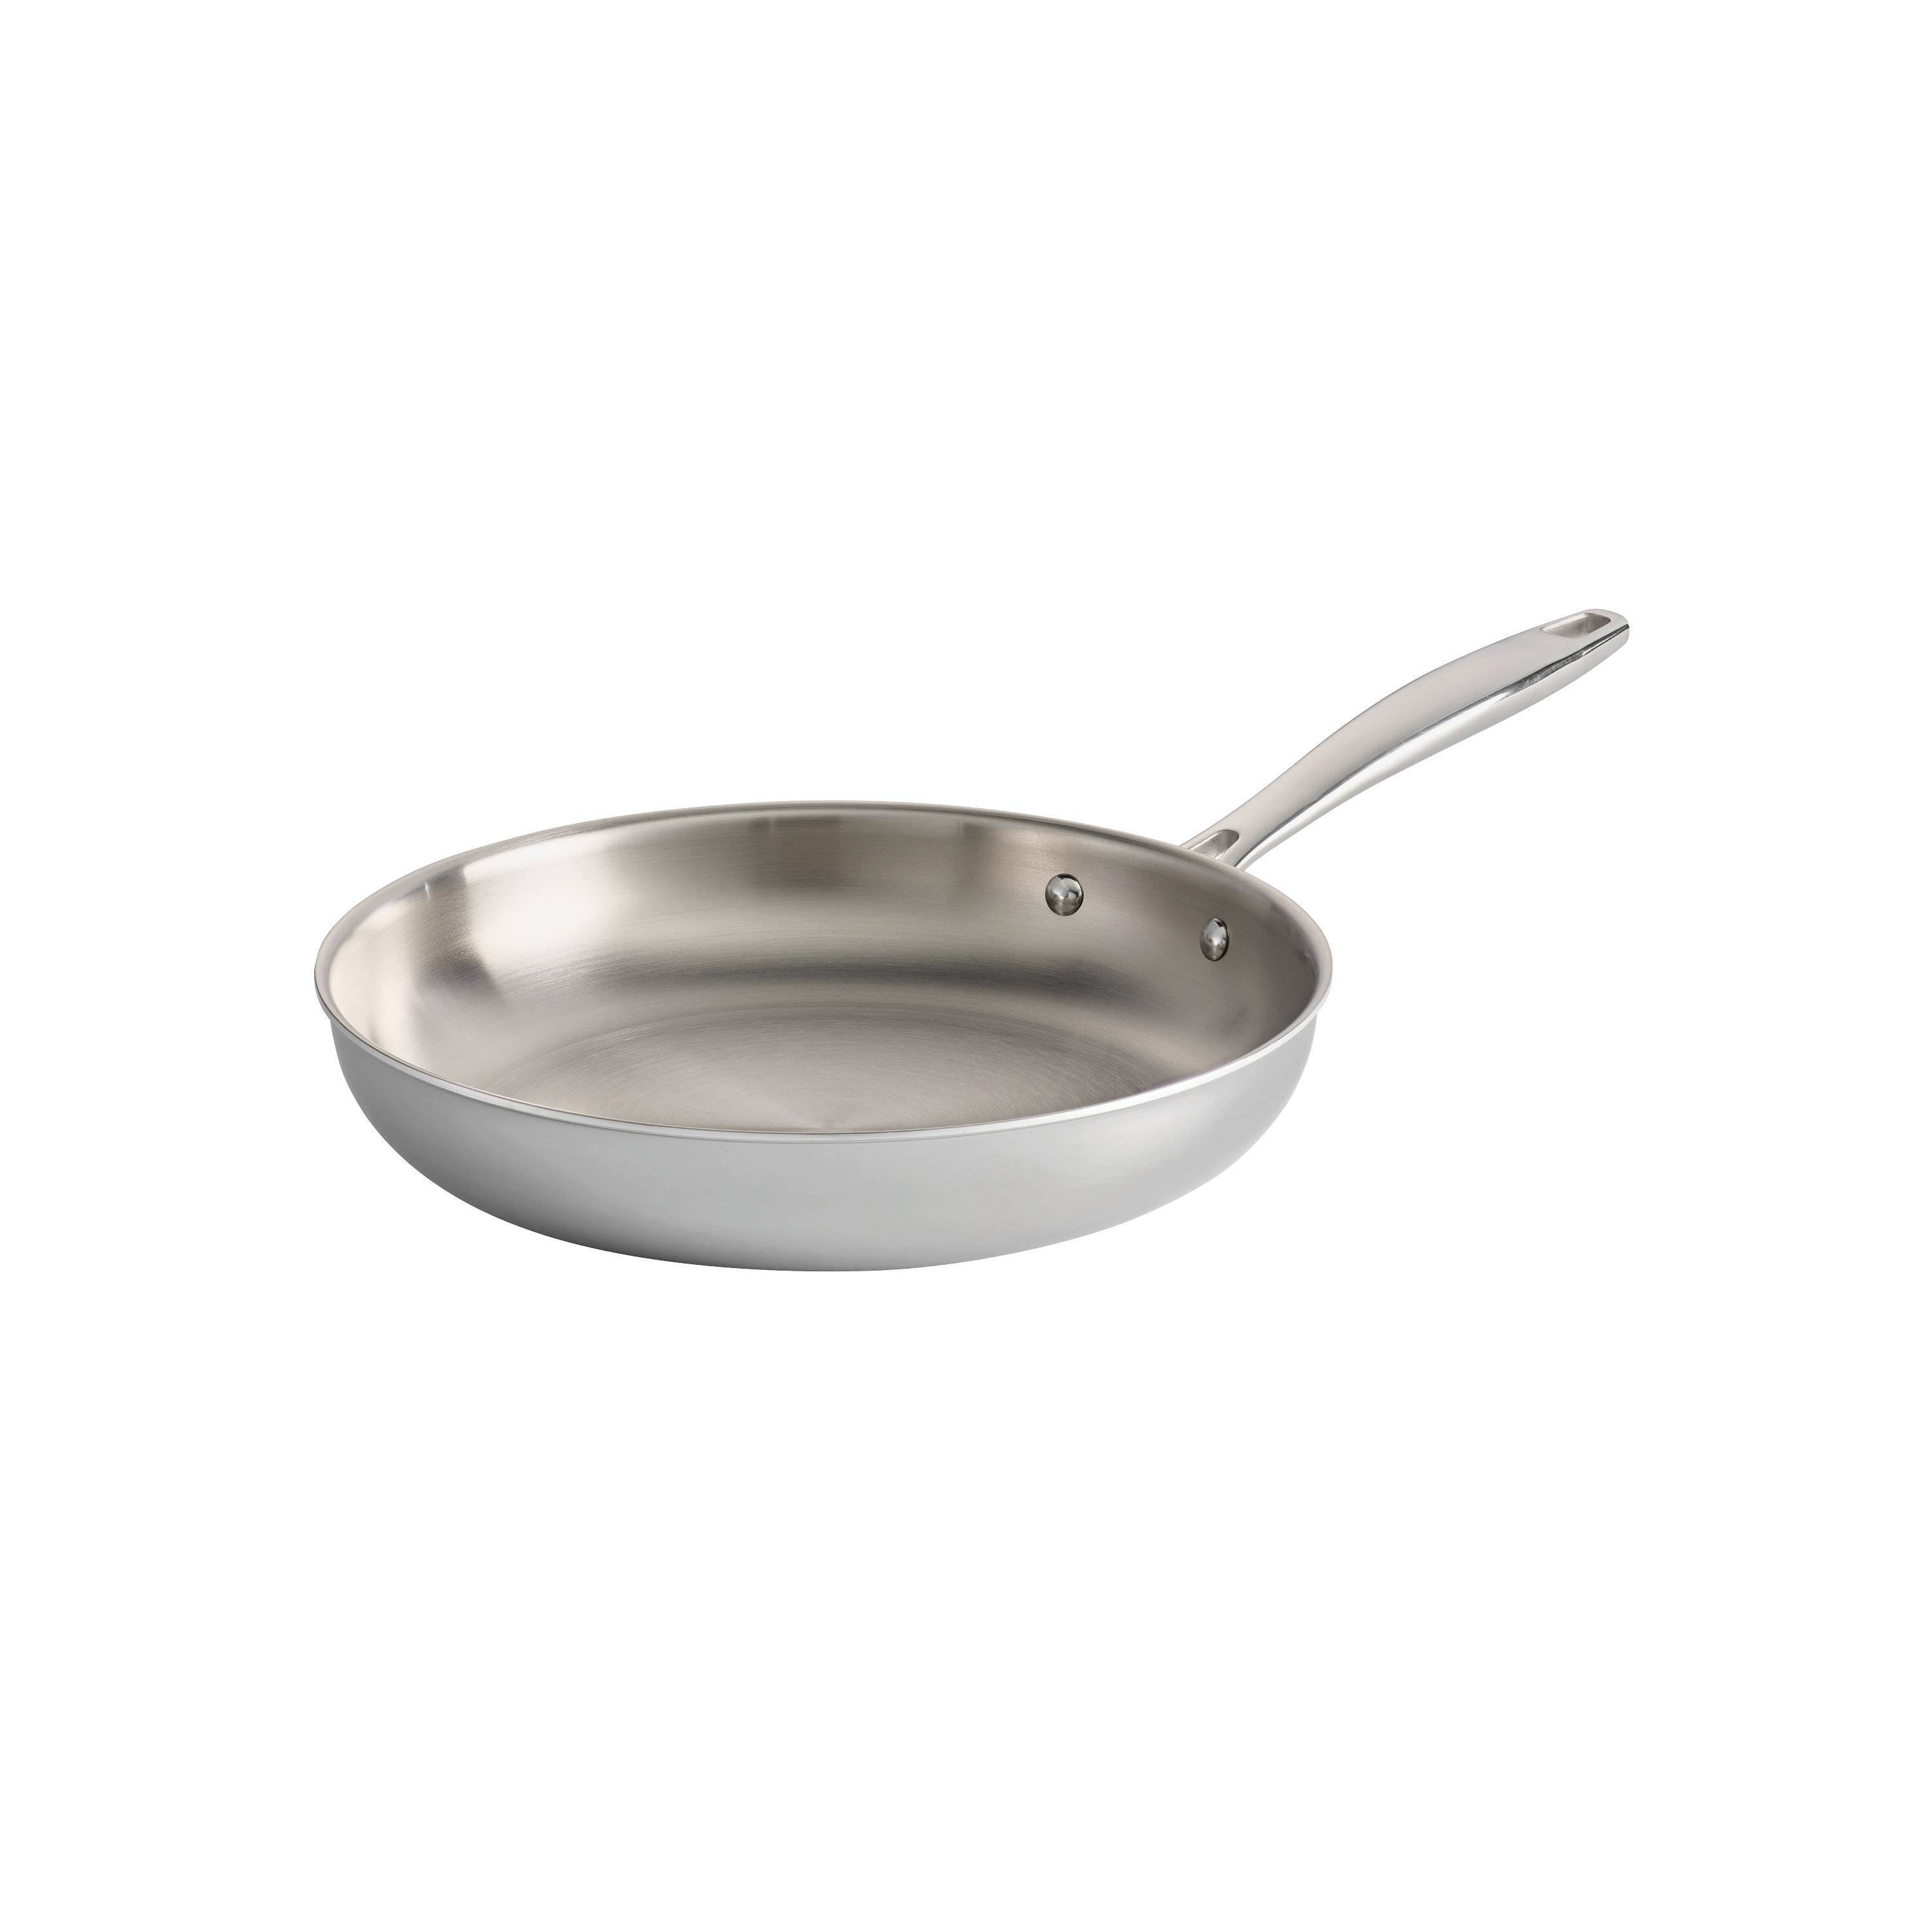 Tramontina Gourmet 10 Tri-Ply Clad Fry Pan Stainless Steel